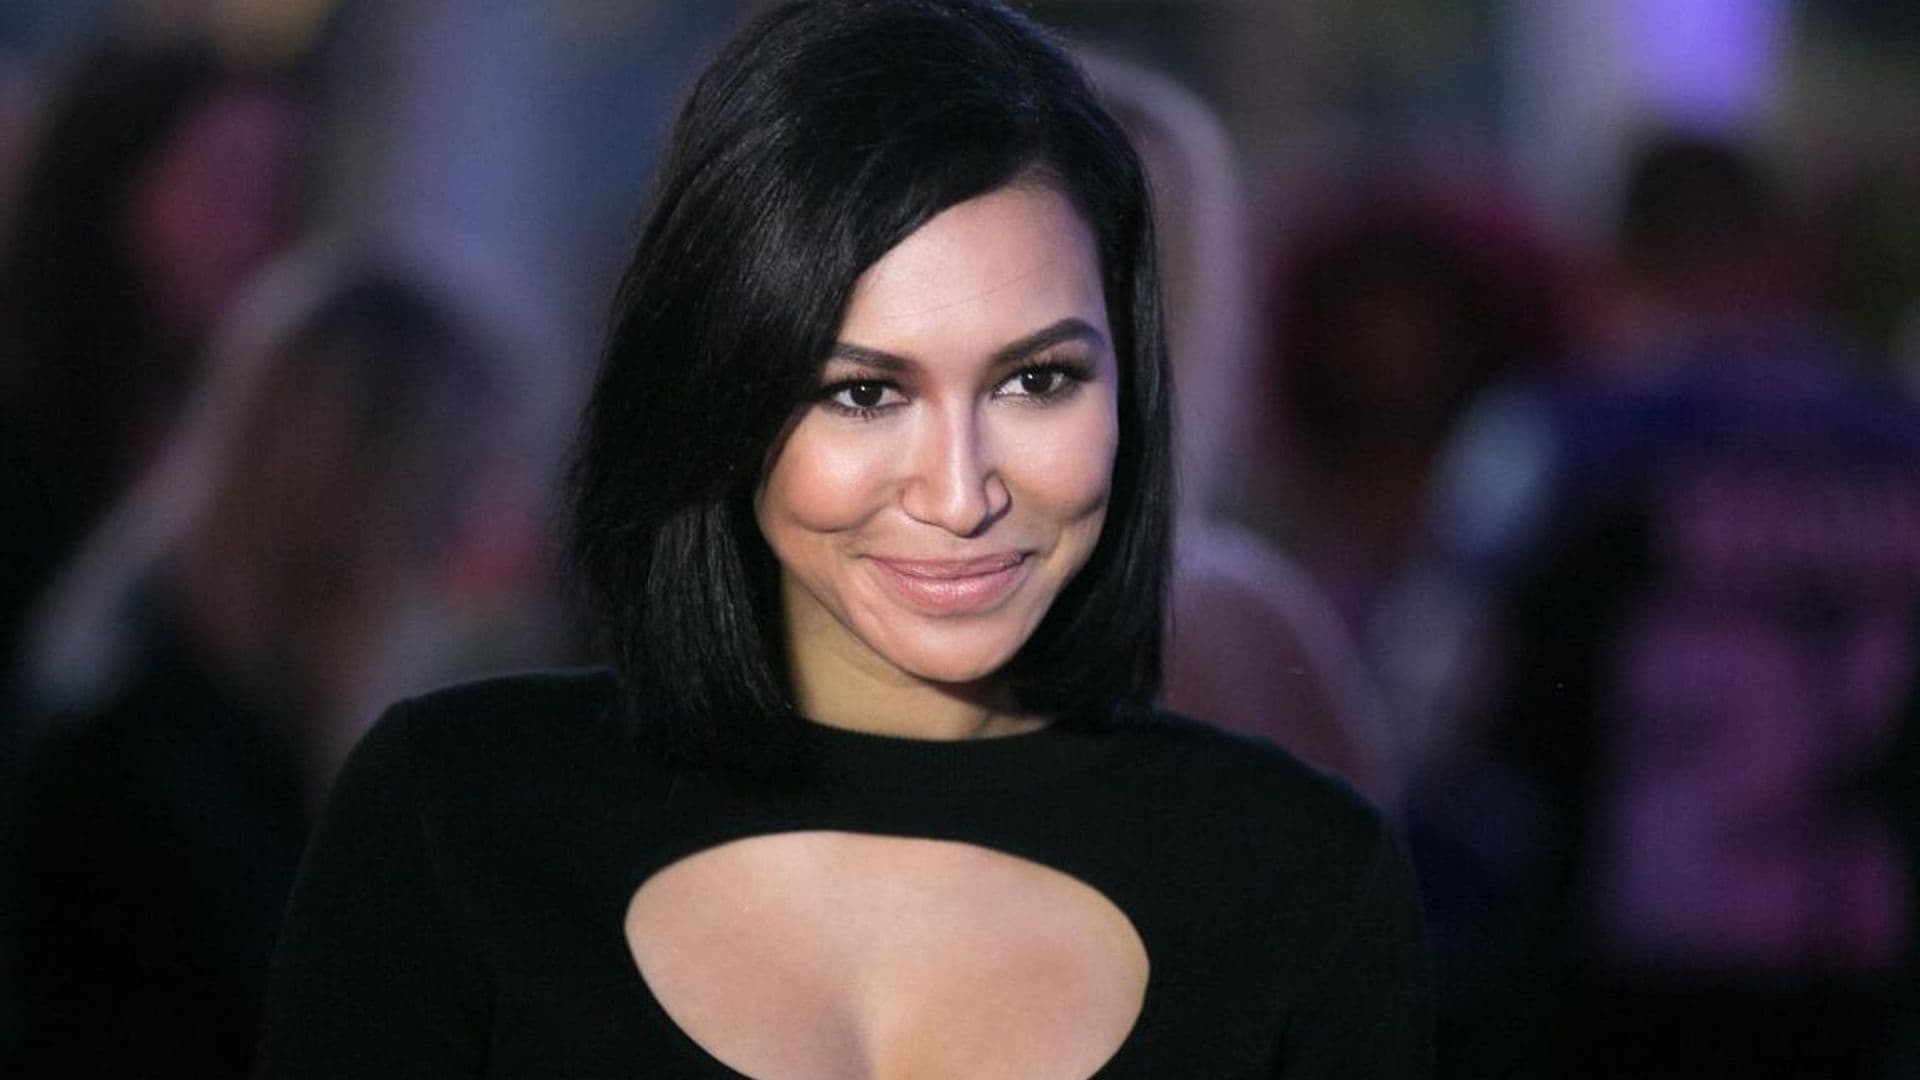 Naya Rivera laid to rest as final TV appearance premieres